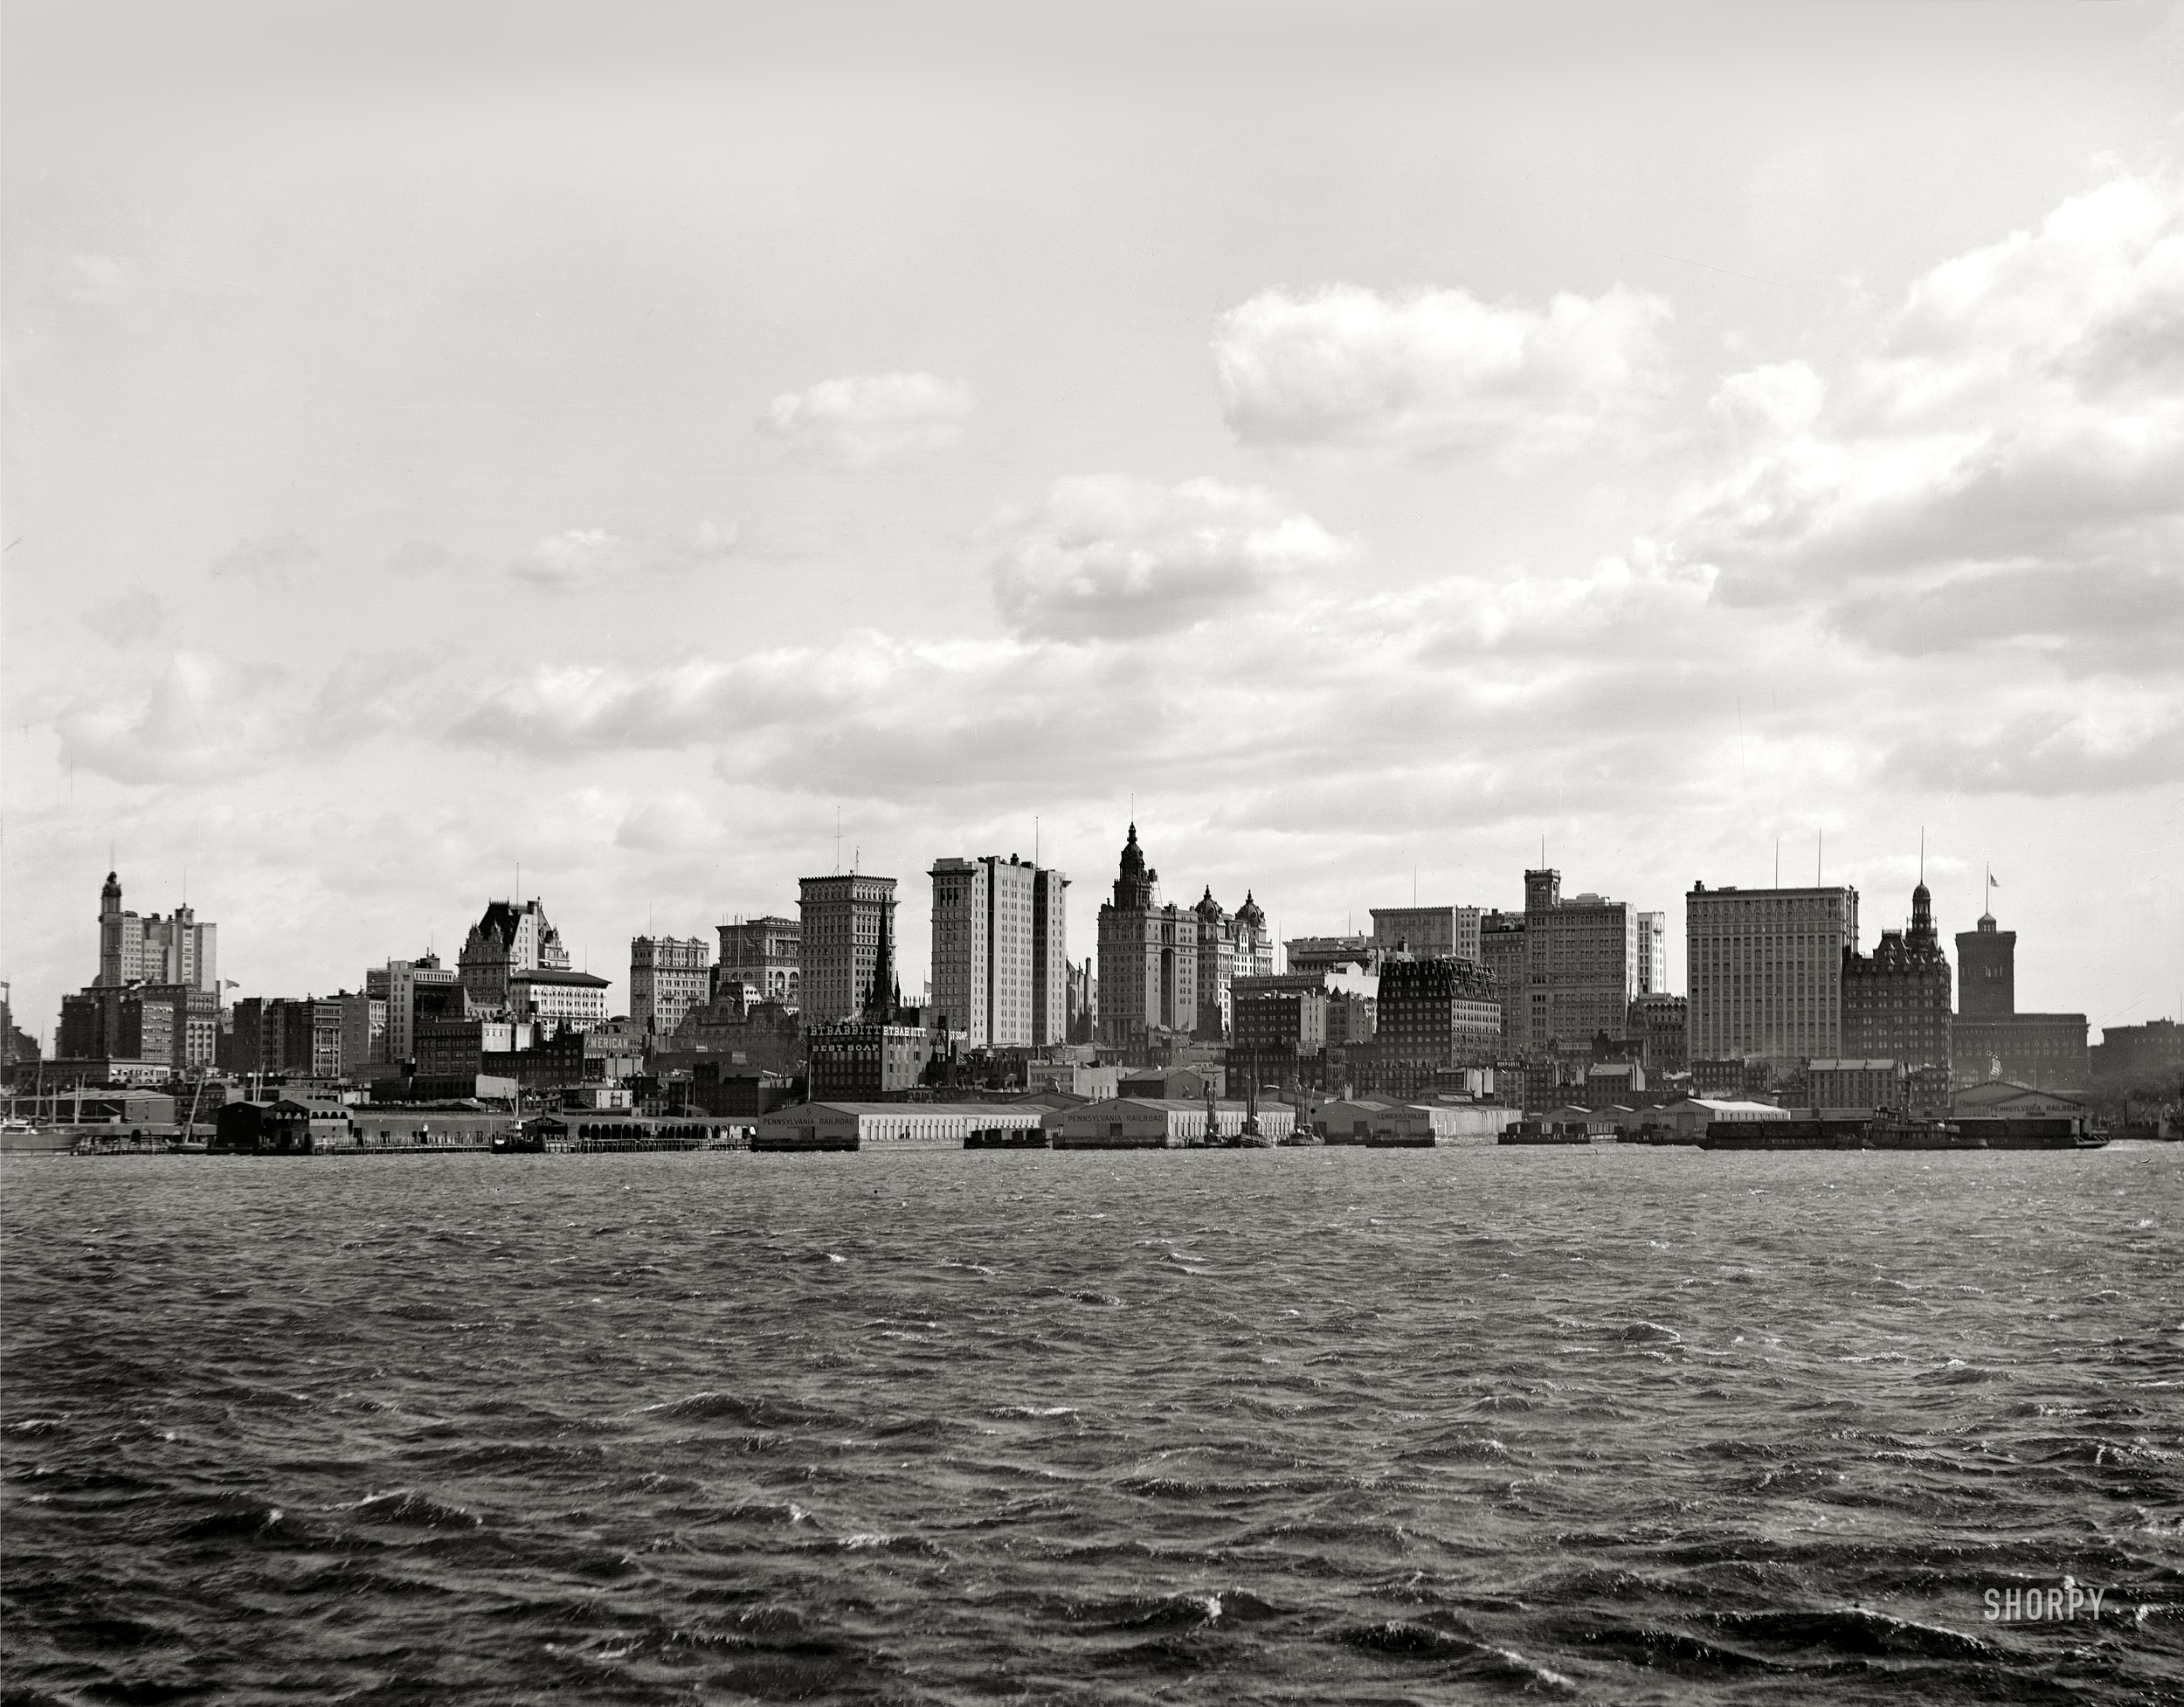 New York circa 1901. "Manhattan sky-line from North River," i.e. the Hudson River. 8x10 inch glass negative, Detroit Publishing Company. View full size.